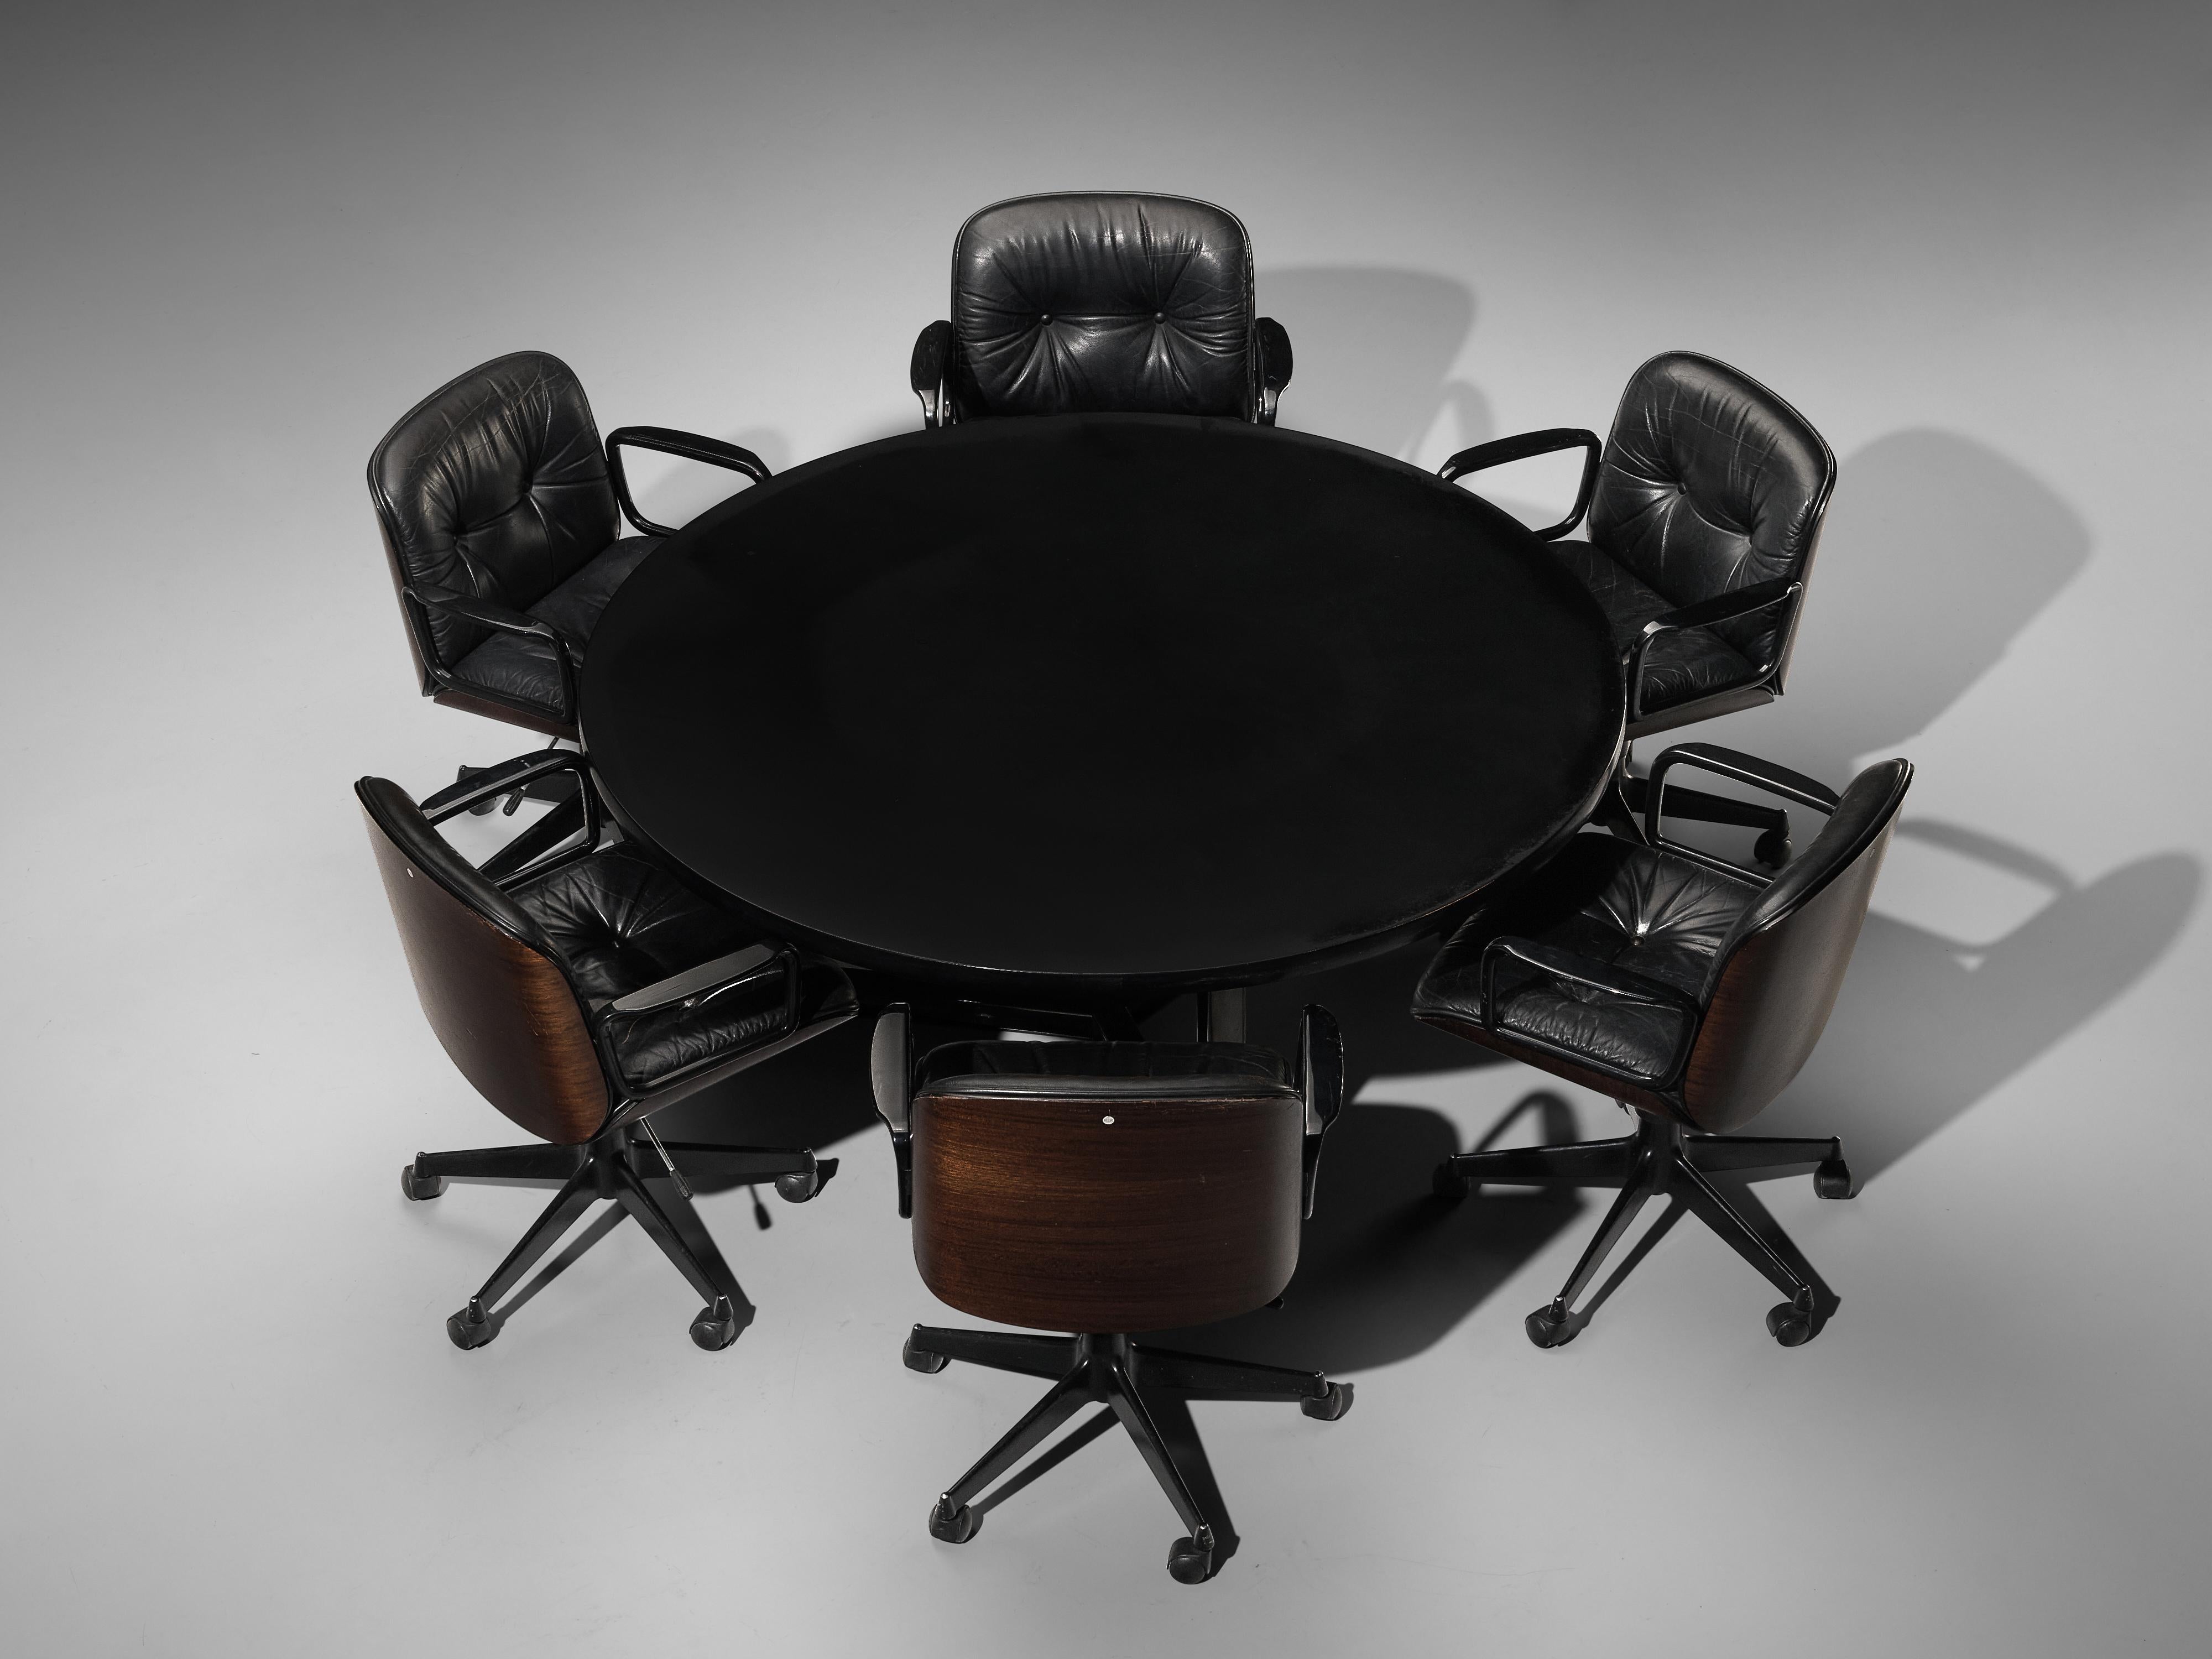 Osvaldo Borsani for Tecno, conference table T334-C, aluminum and wood, Italy, 1975-1978.

Round dining table with a round top. The base consists out of a three-legged metal frame which creates an open character. It was at the time that founder and